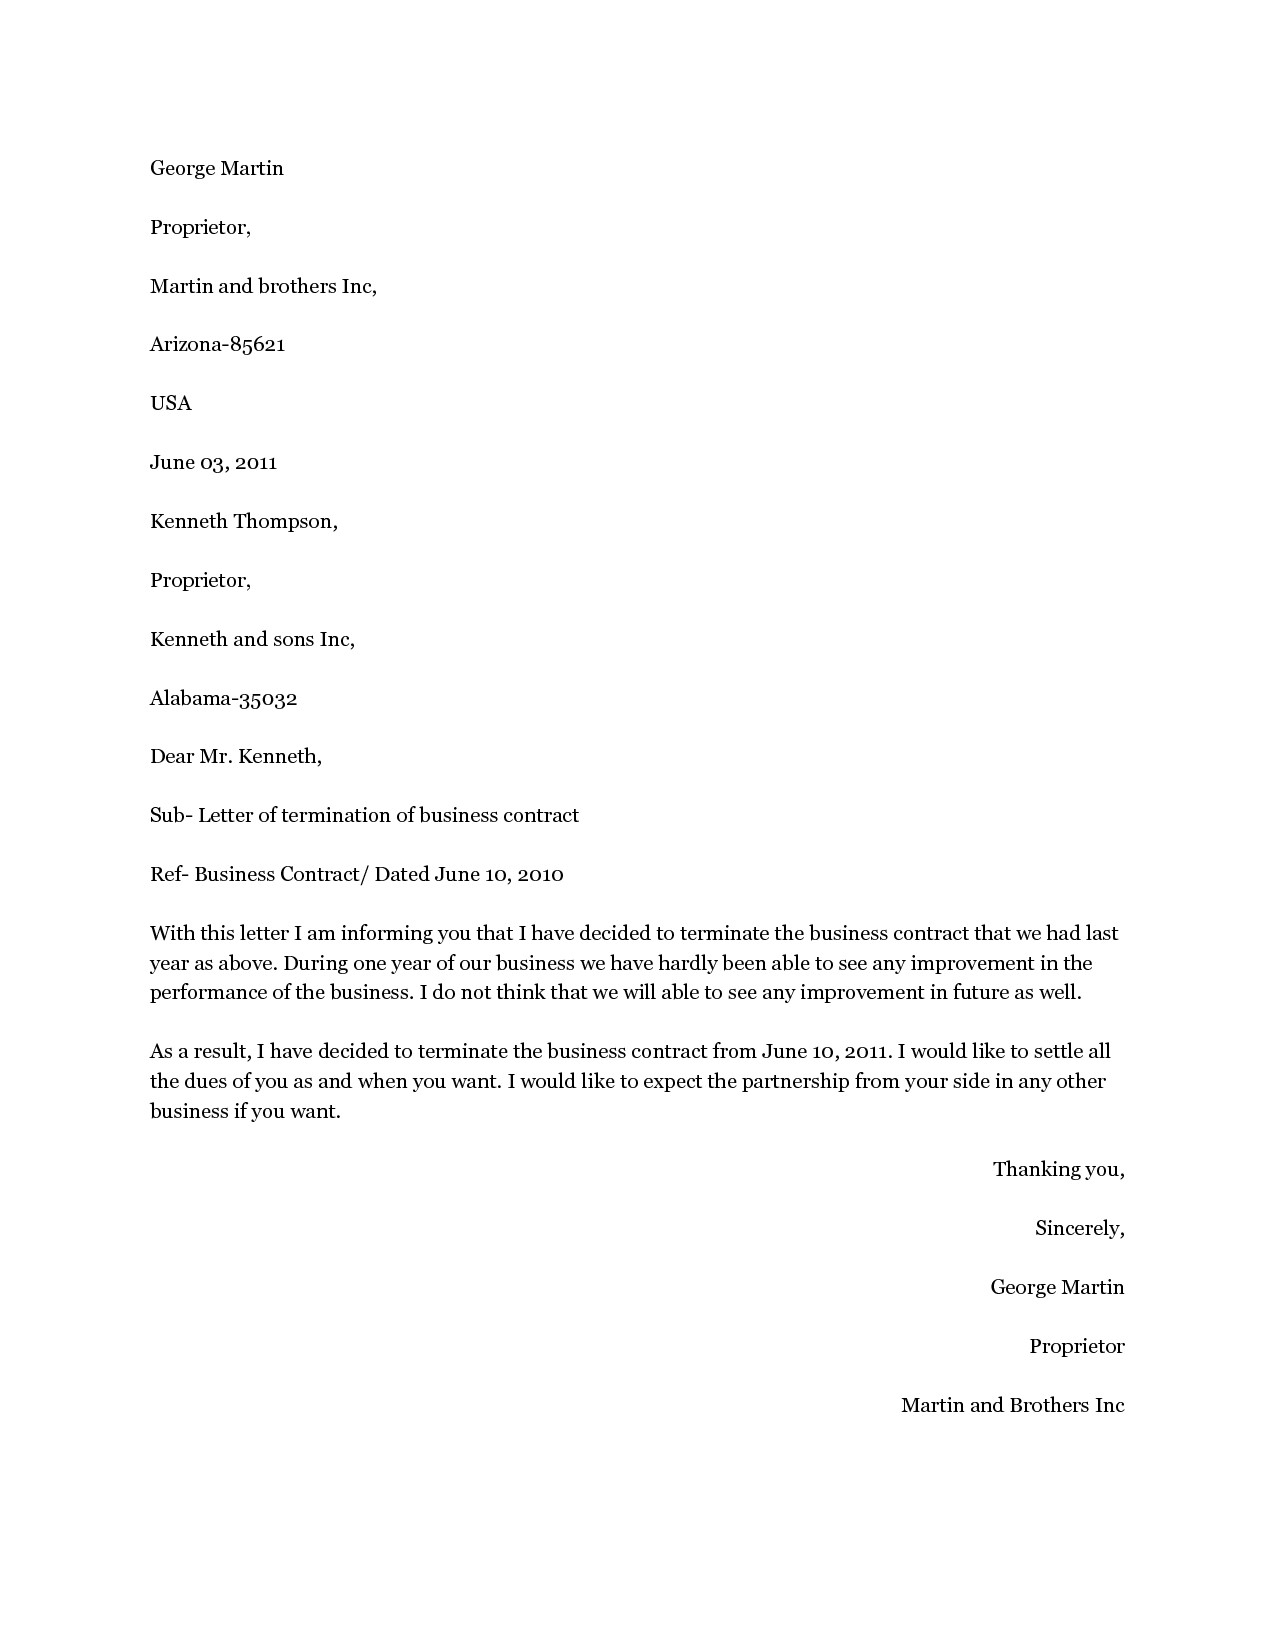 Cancellation Letter Template - Cancellation Contract Elegant Refund Agreement Sample Image